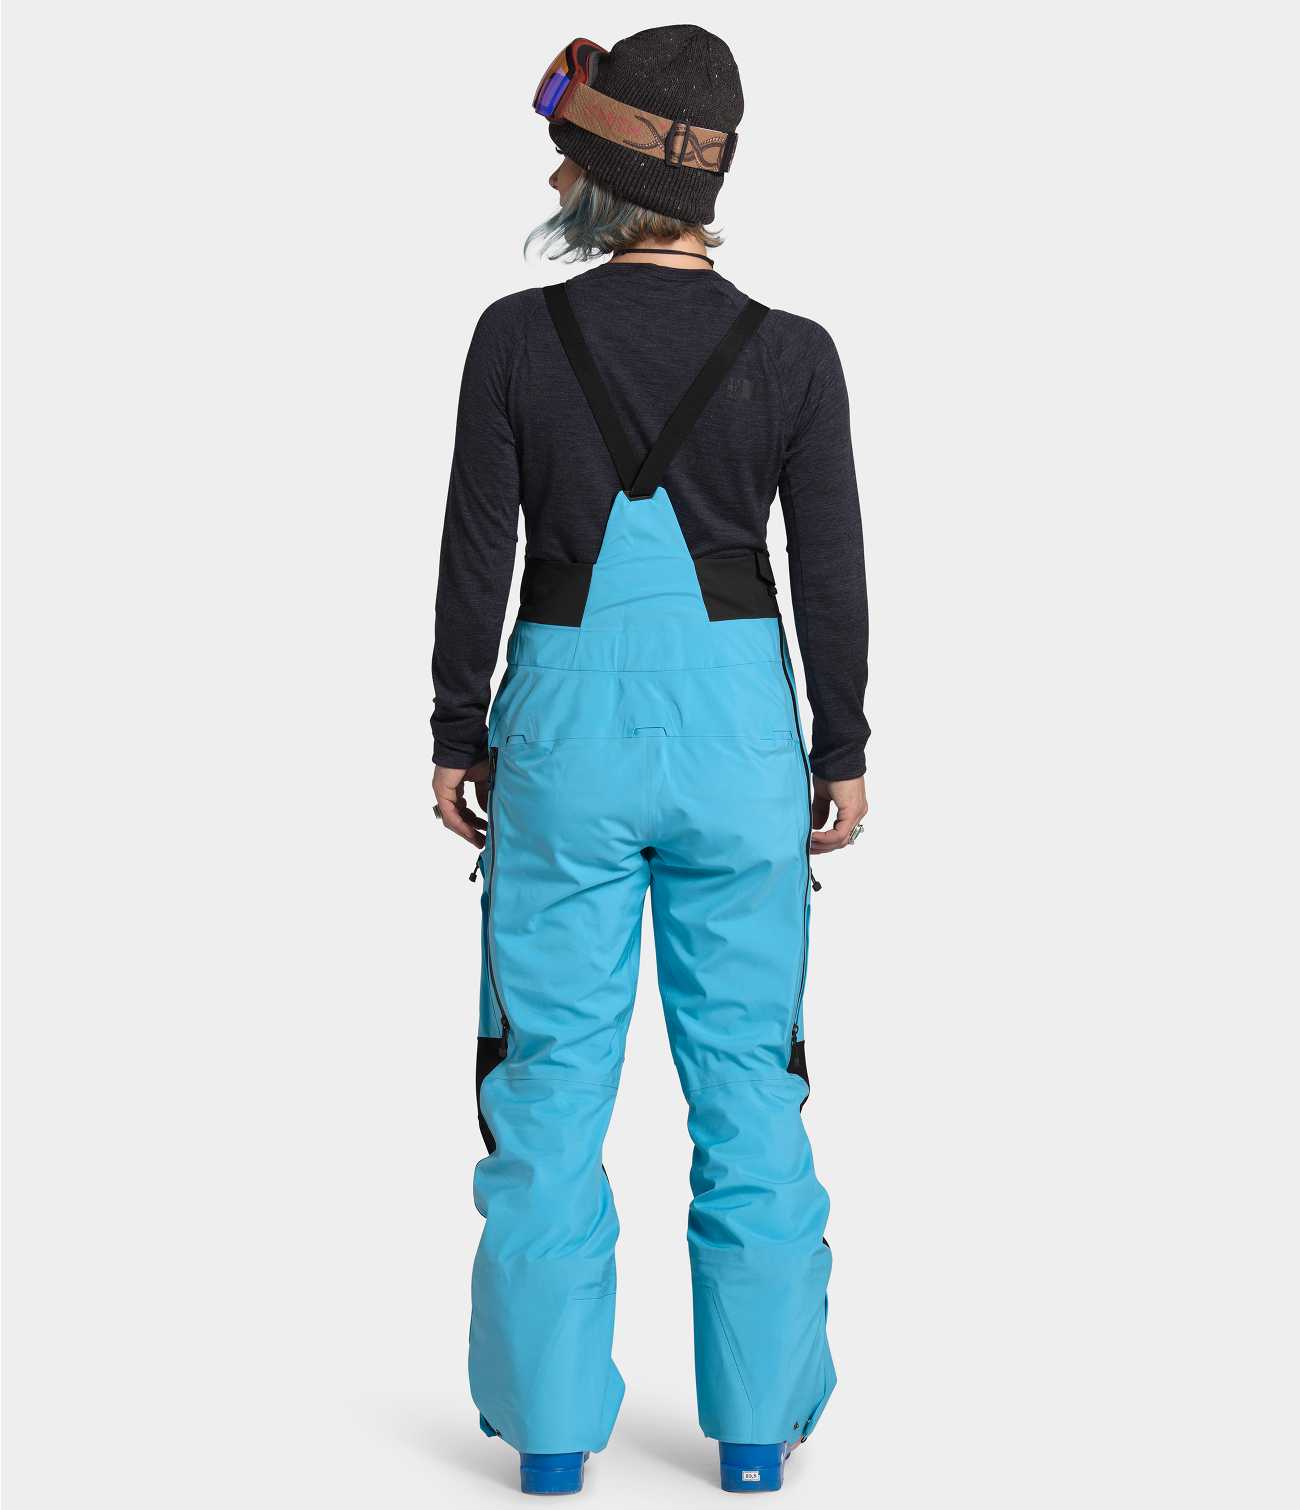 WOMEN'S A-CAD BIBS | The North Face | The North Face Renewed